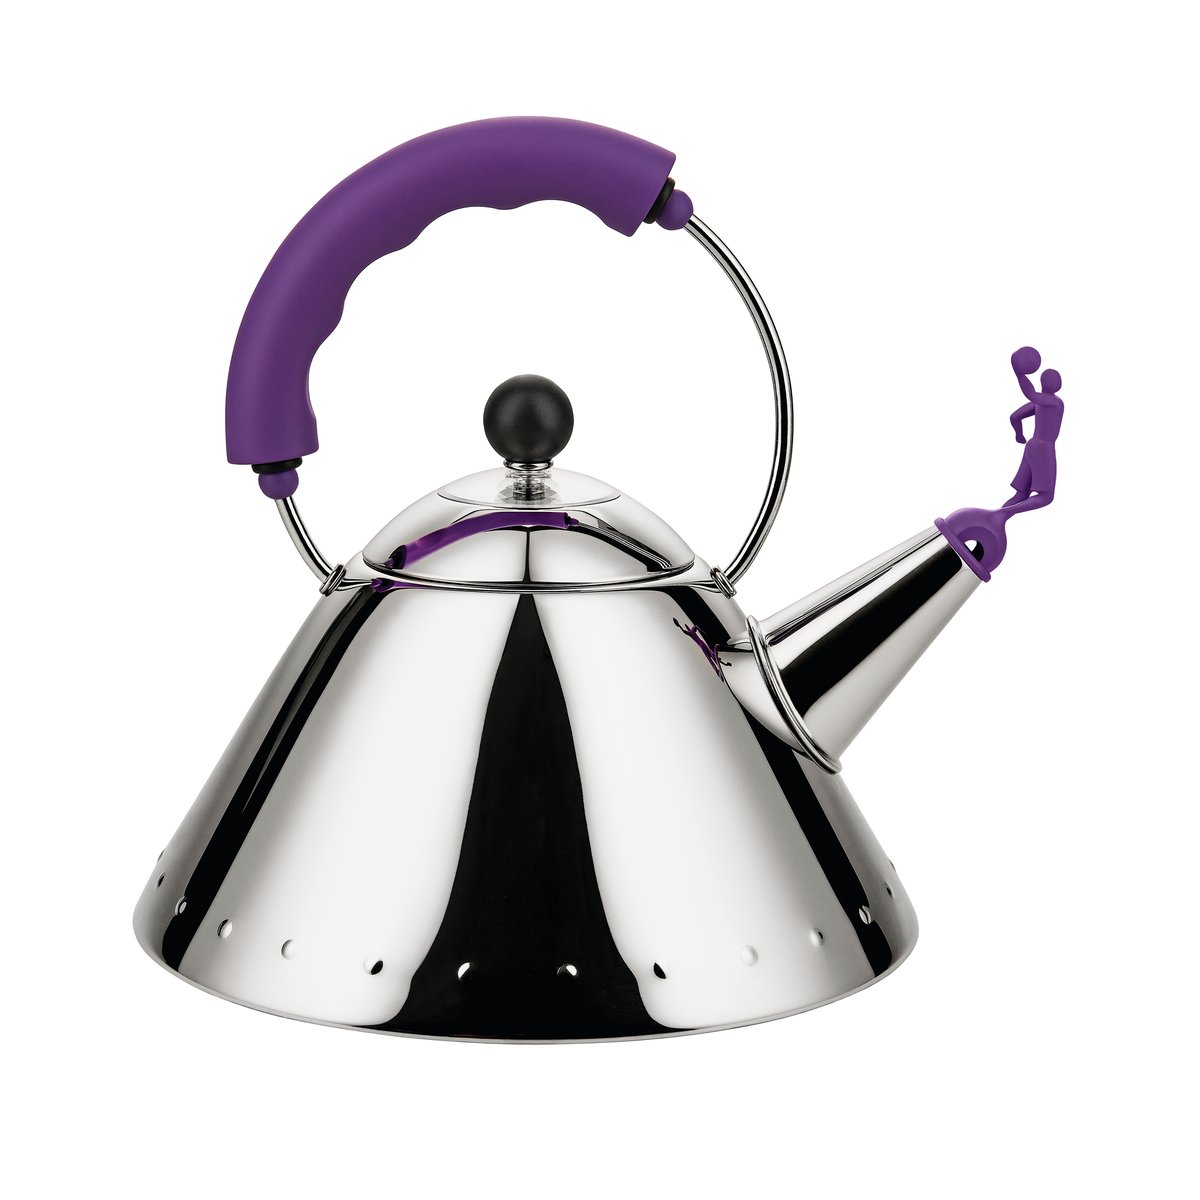 Alessi 3909 fluitketel limited edition Paars